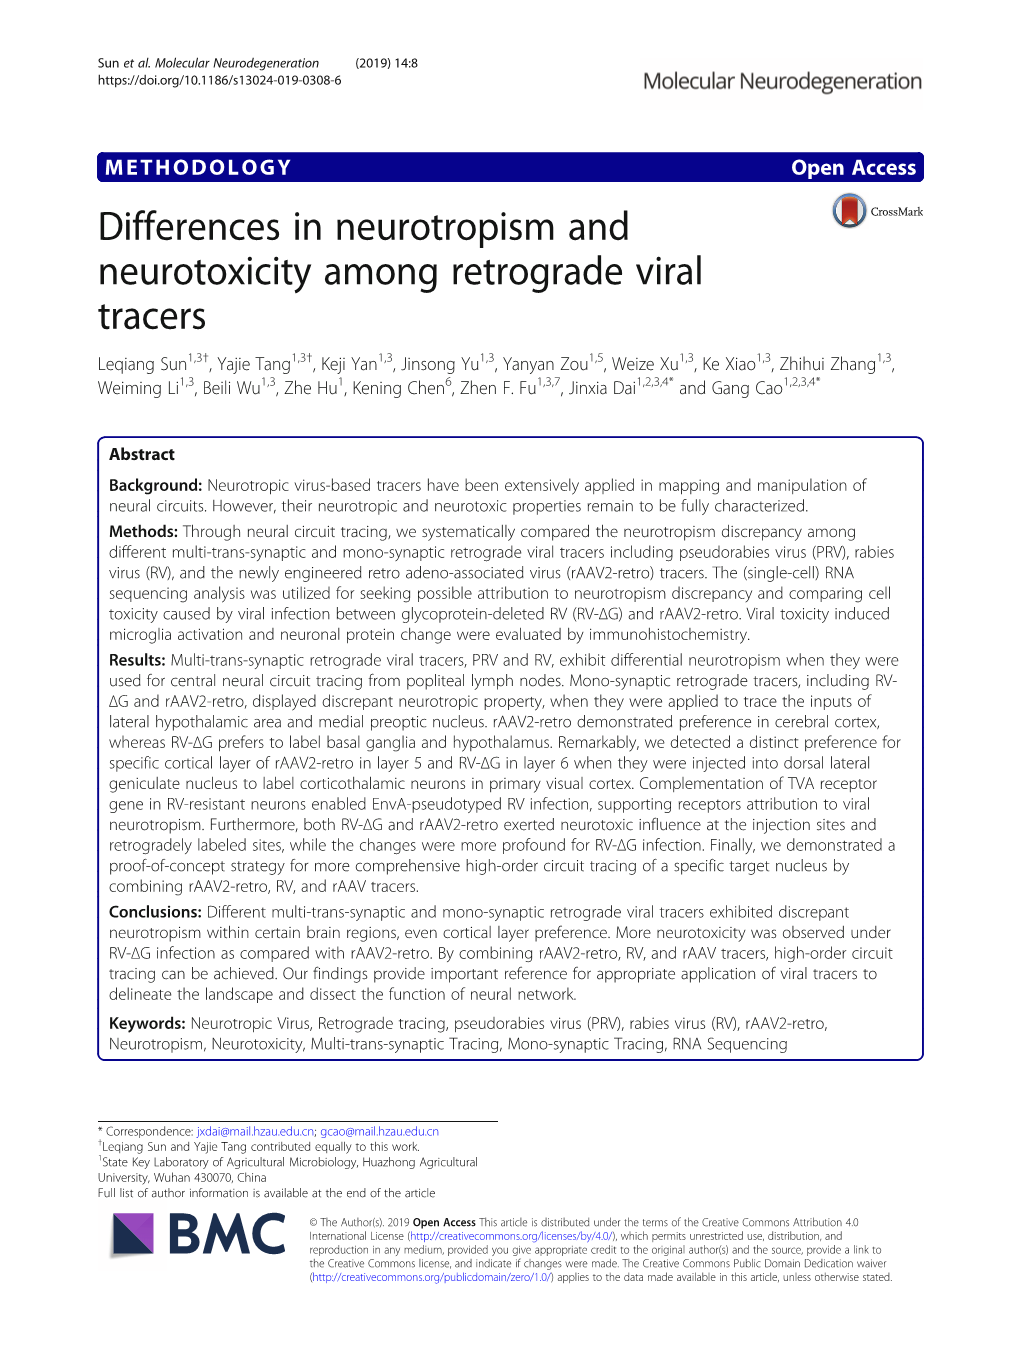 Differences in Neurotropism and Neurotoxicity Among Retrograde Viral Tracers